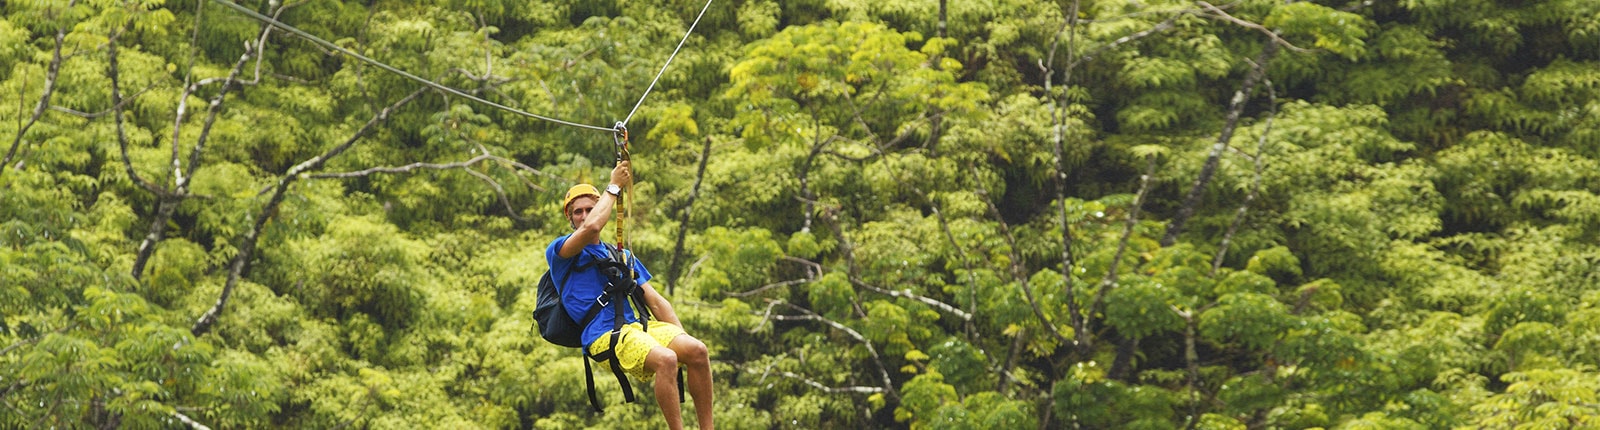 Ziplining through the forest canopy in Amber Cove, Puerto Plata, Dominican Republic